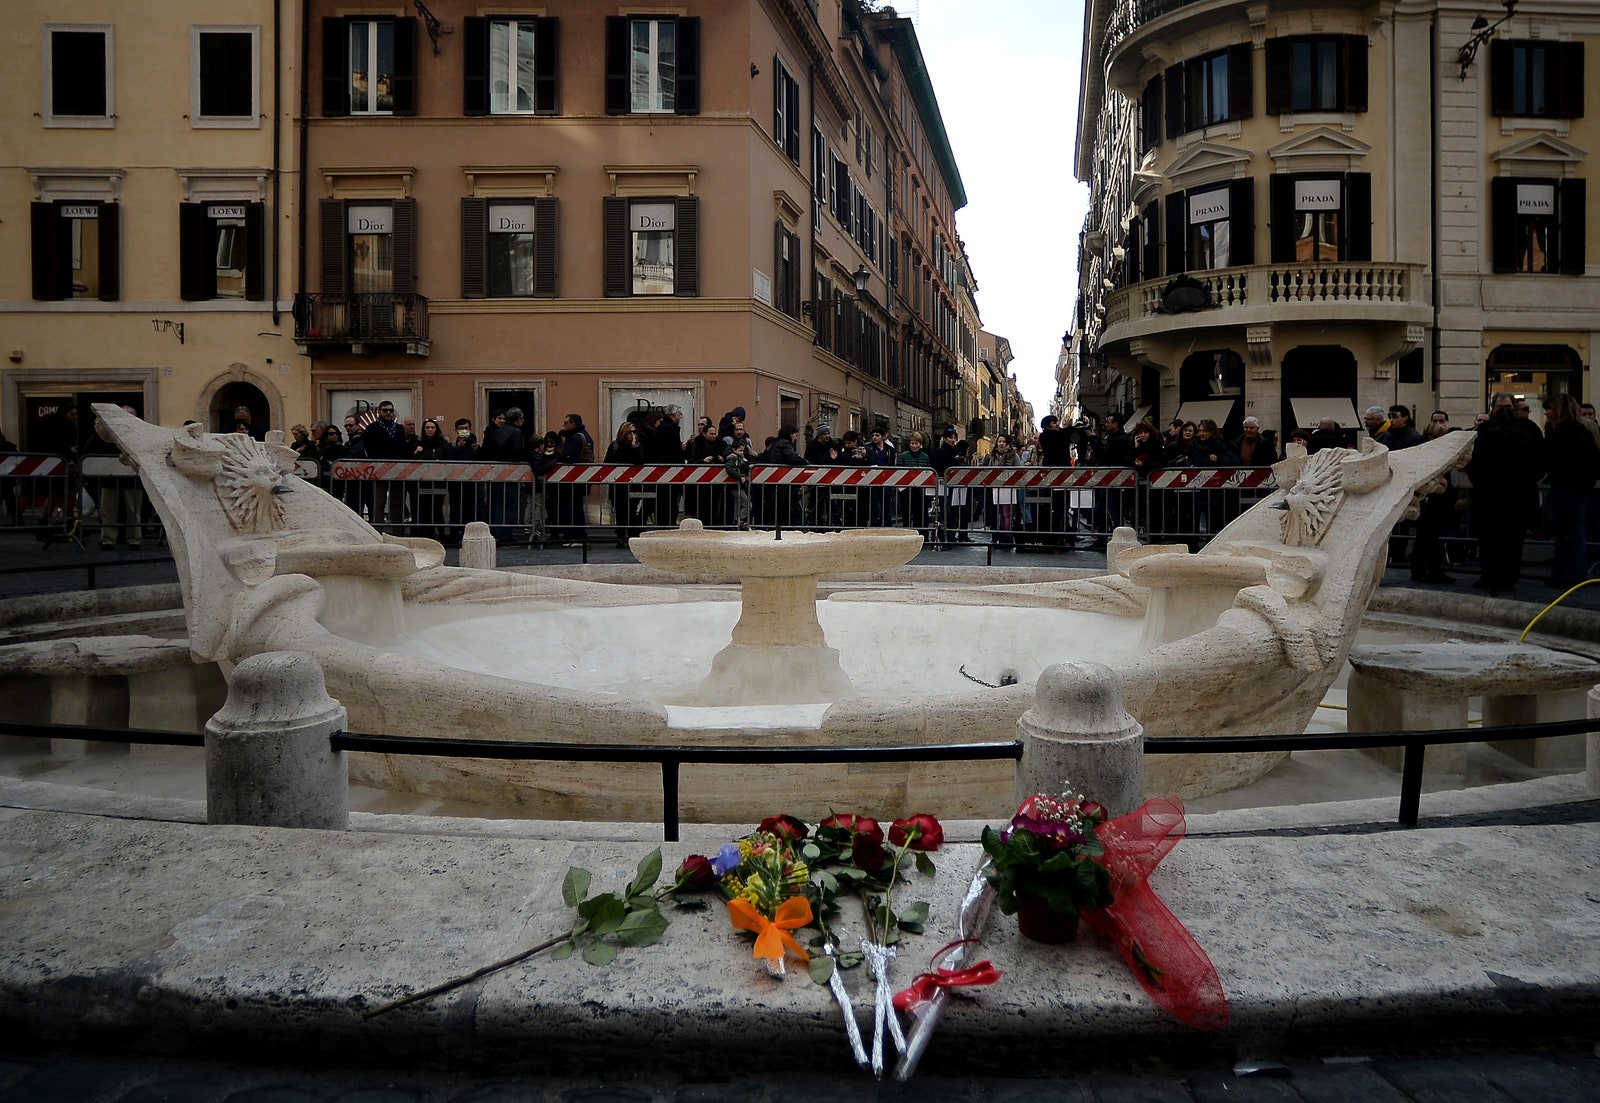 Romes Piazza di Spagna with flowers left at cordonedoff damaged fountain